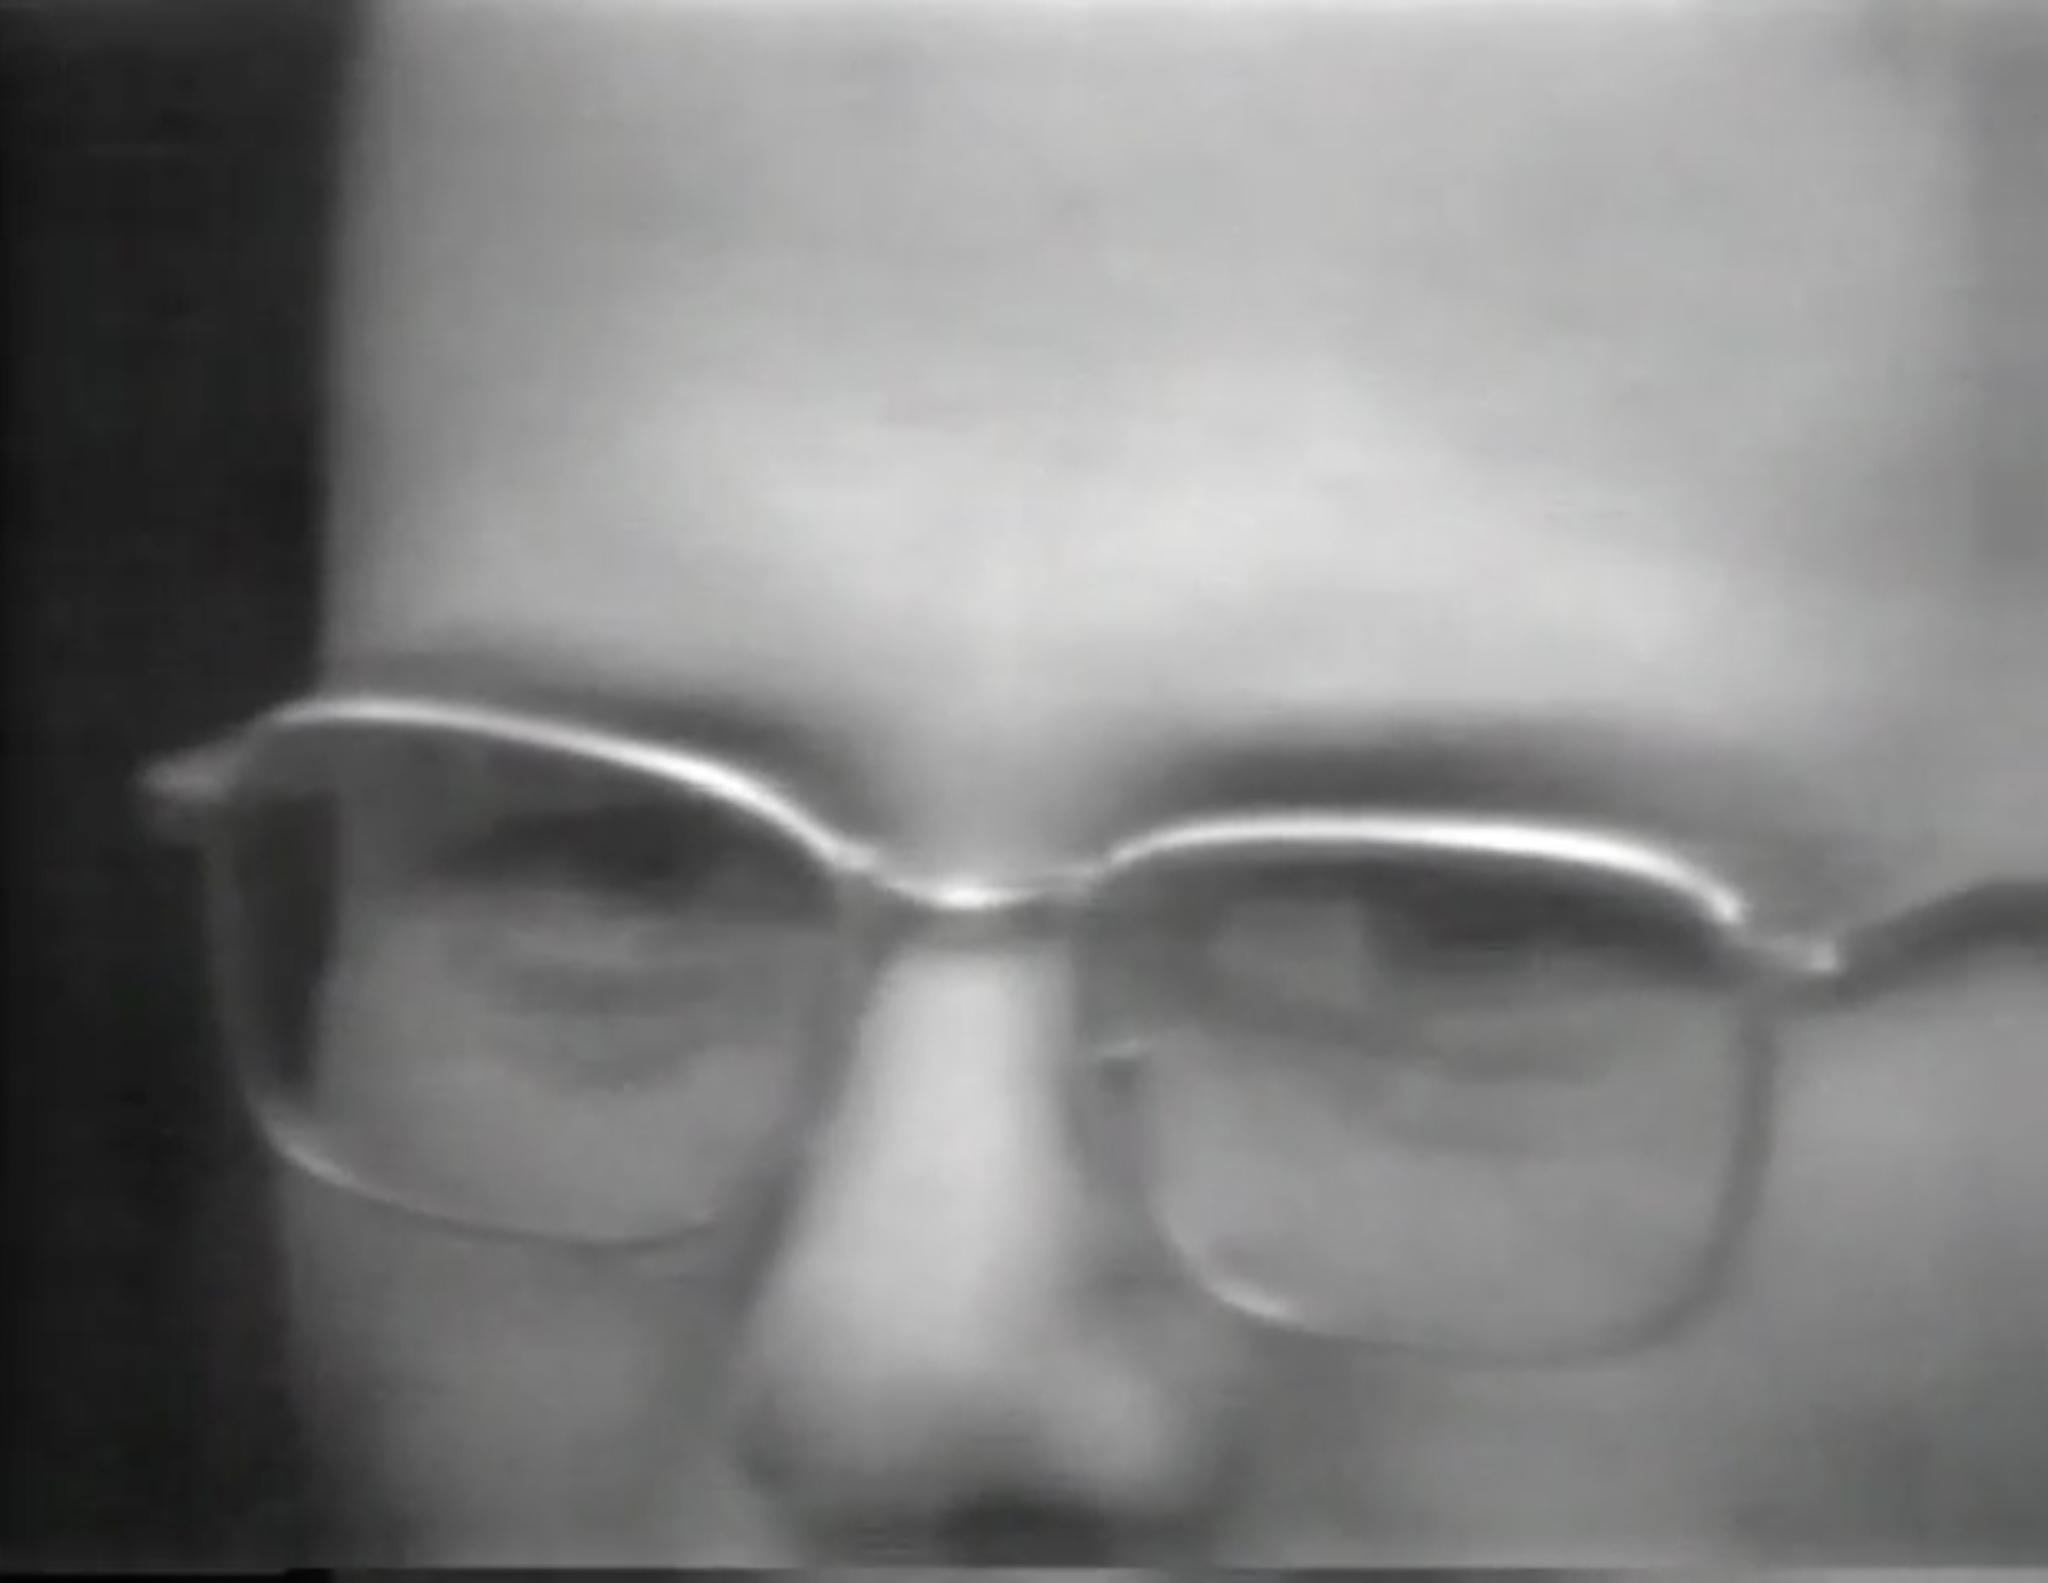 Black and white close-up image of a man with glasses.